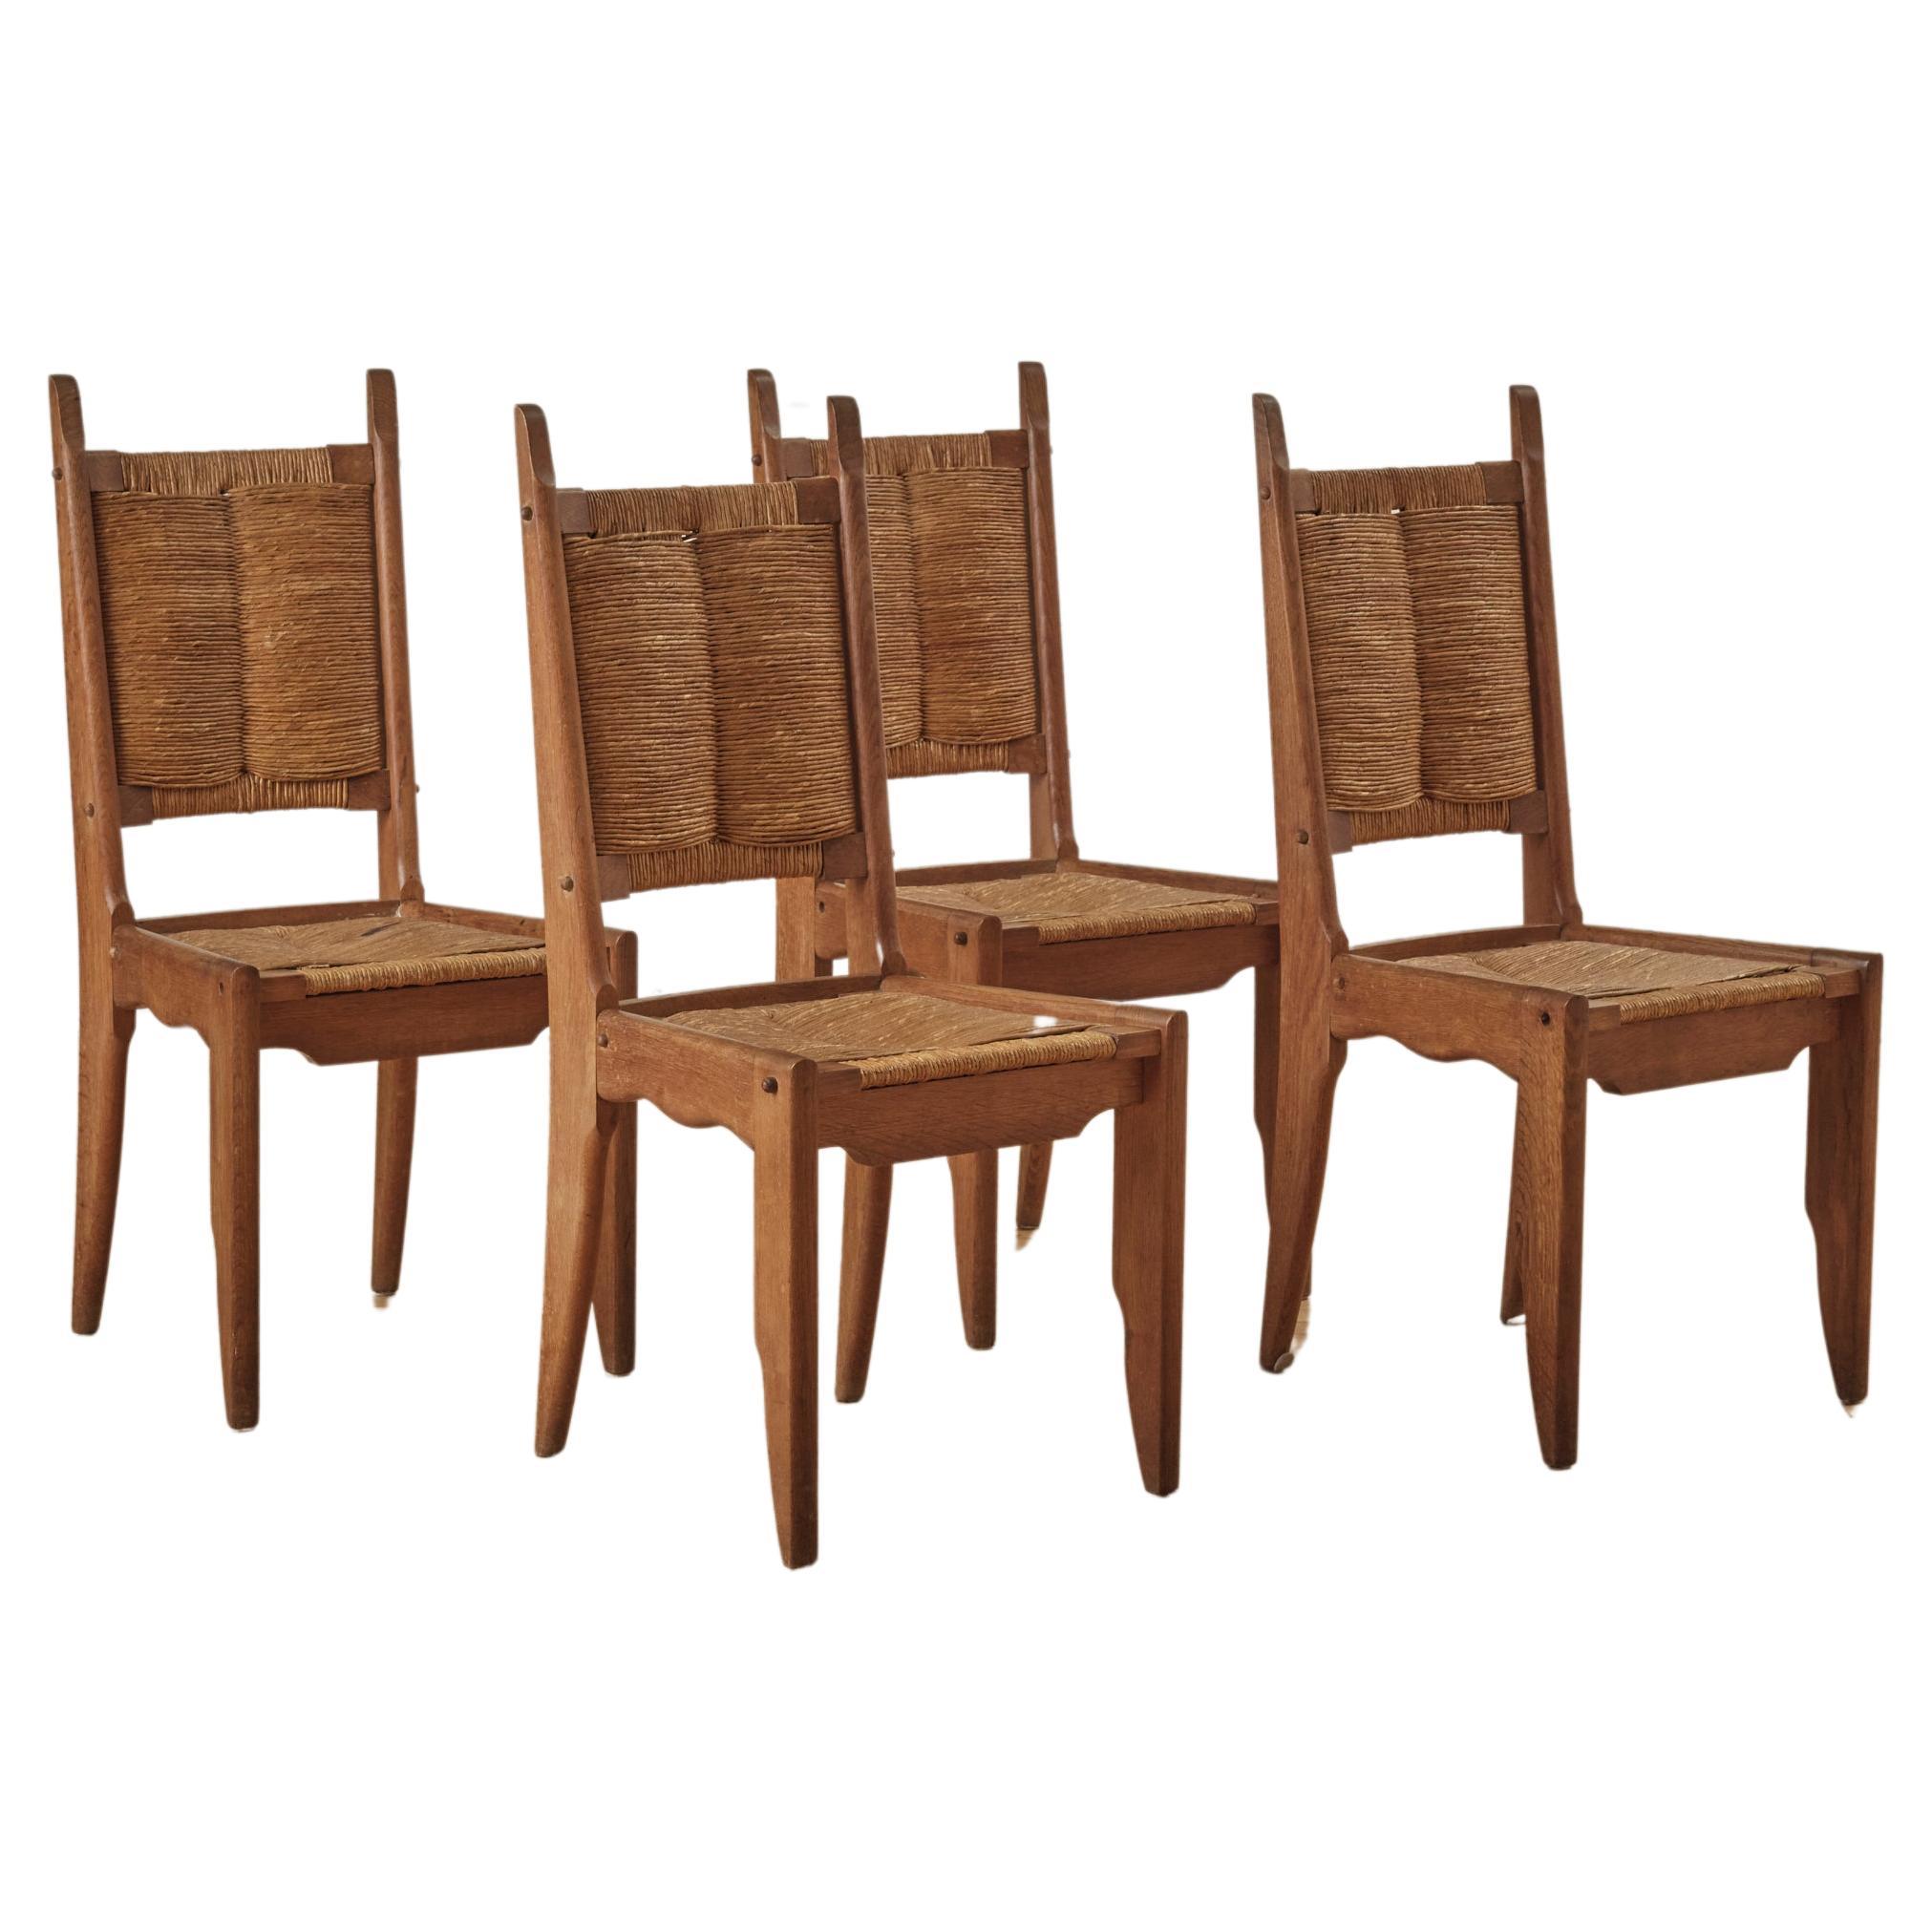 Set of 4 Dining Chairs by Guillerme and Chambron for Notre maison C. 1950's For Sale